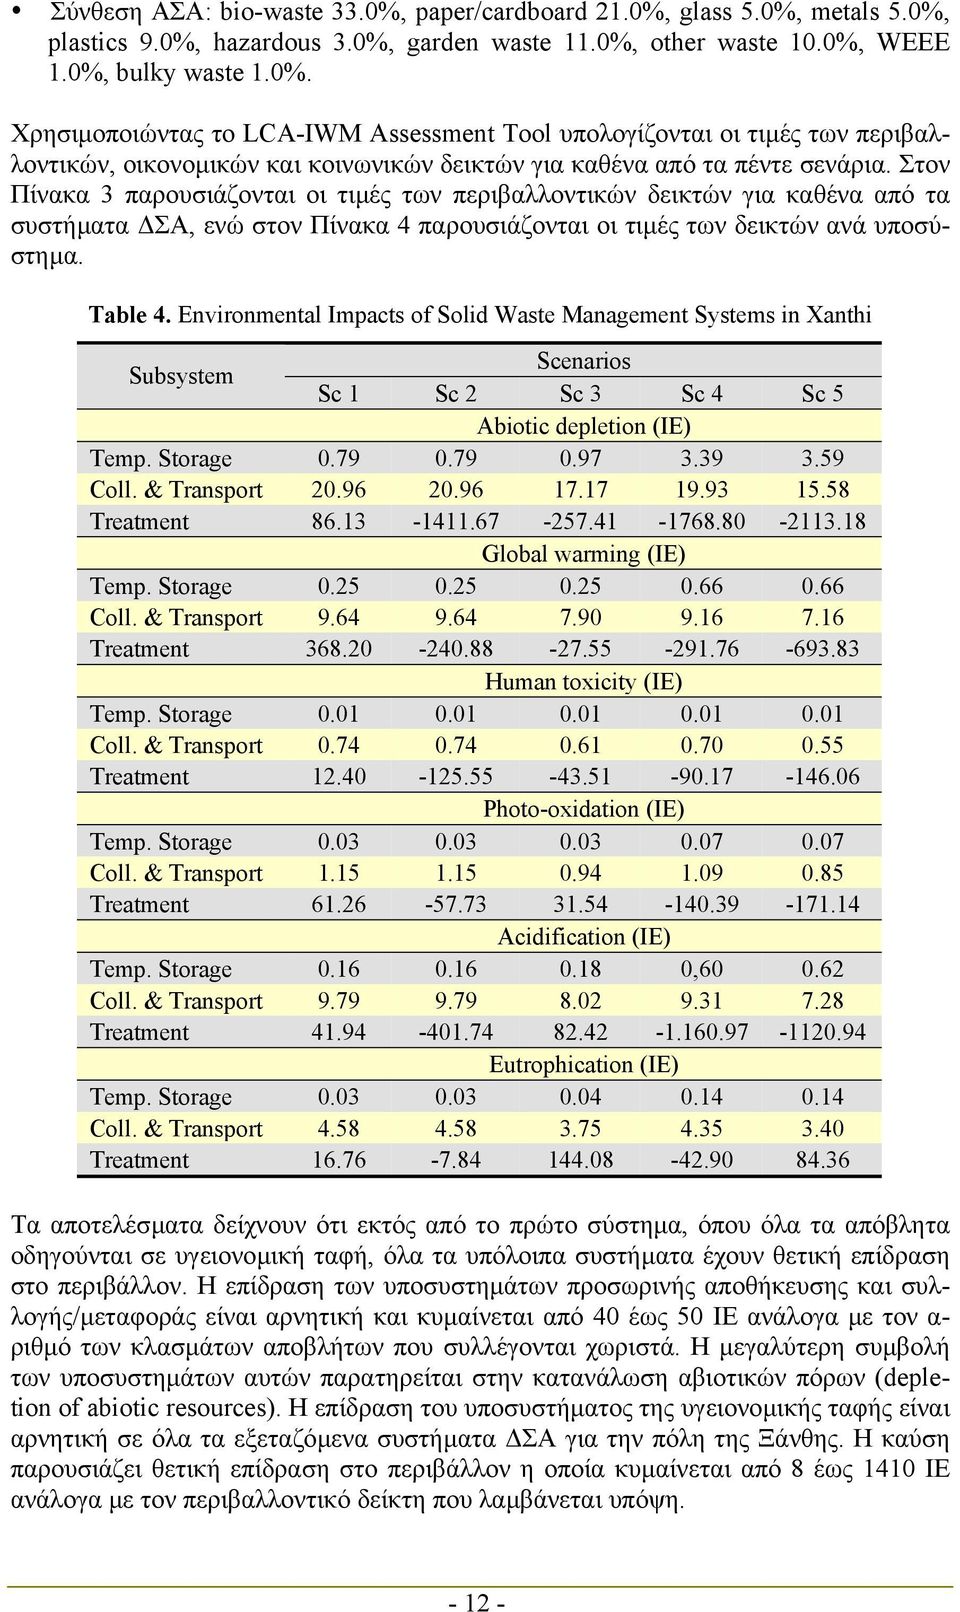 Environmental Impacts of Solid Waste Management Systems in Xanthi Subsystem Sc 5 Abiotic depletion (IE) Temp. Storage 0.79 0.79 0.97 3.39 3.59 Coll. & Transport 20.96 20.96 17.17 19.93 15.